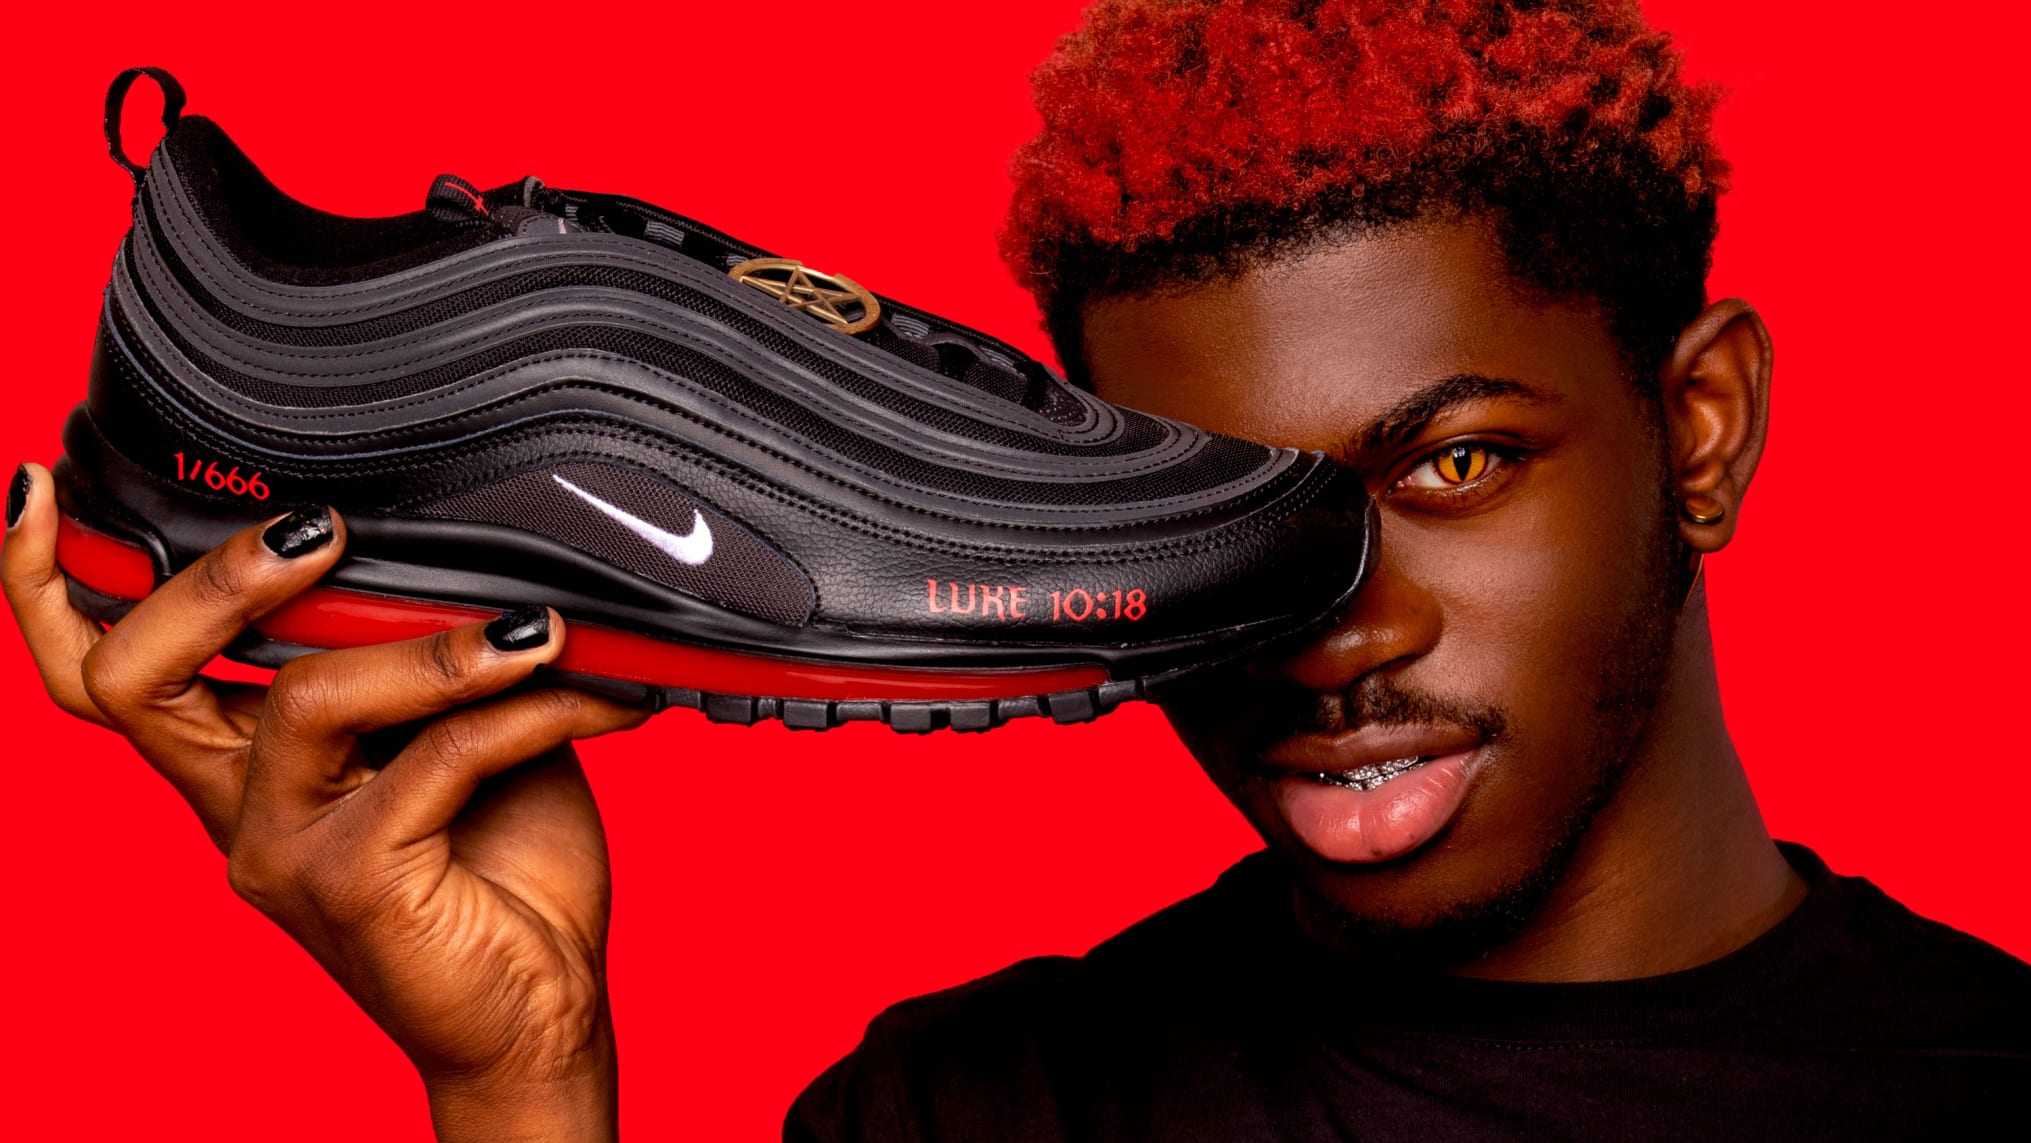 The Lil Nas X Satan Shoe was perhaps the most controversial sneaker release of the year.